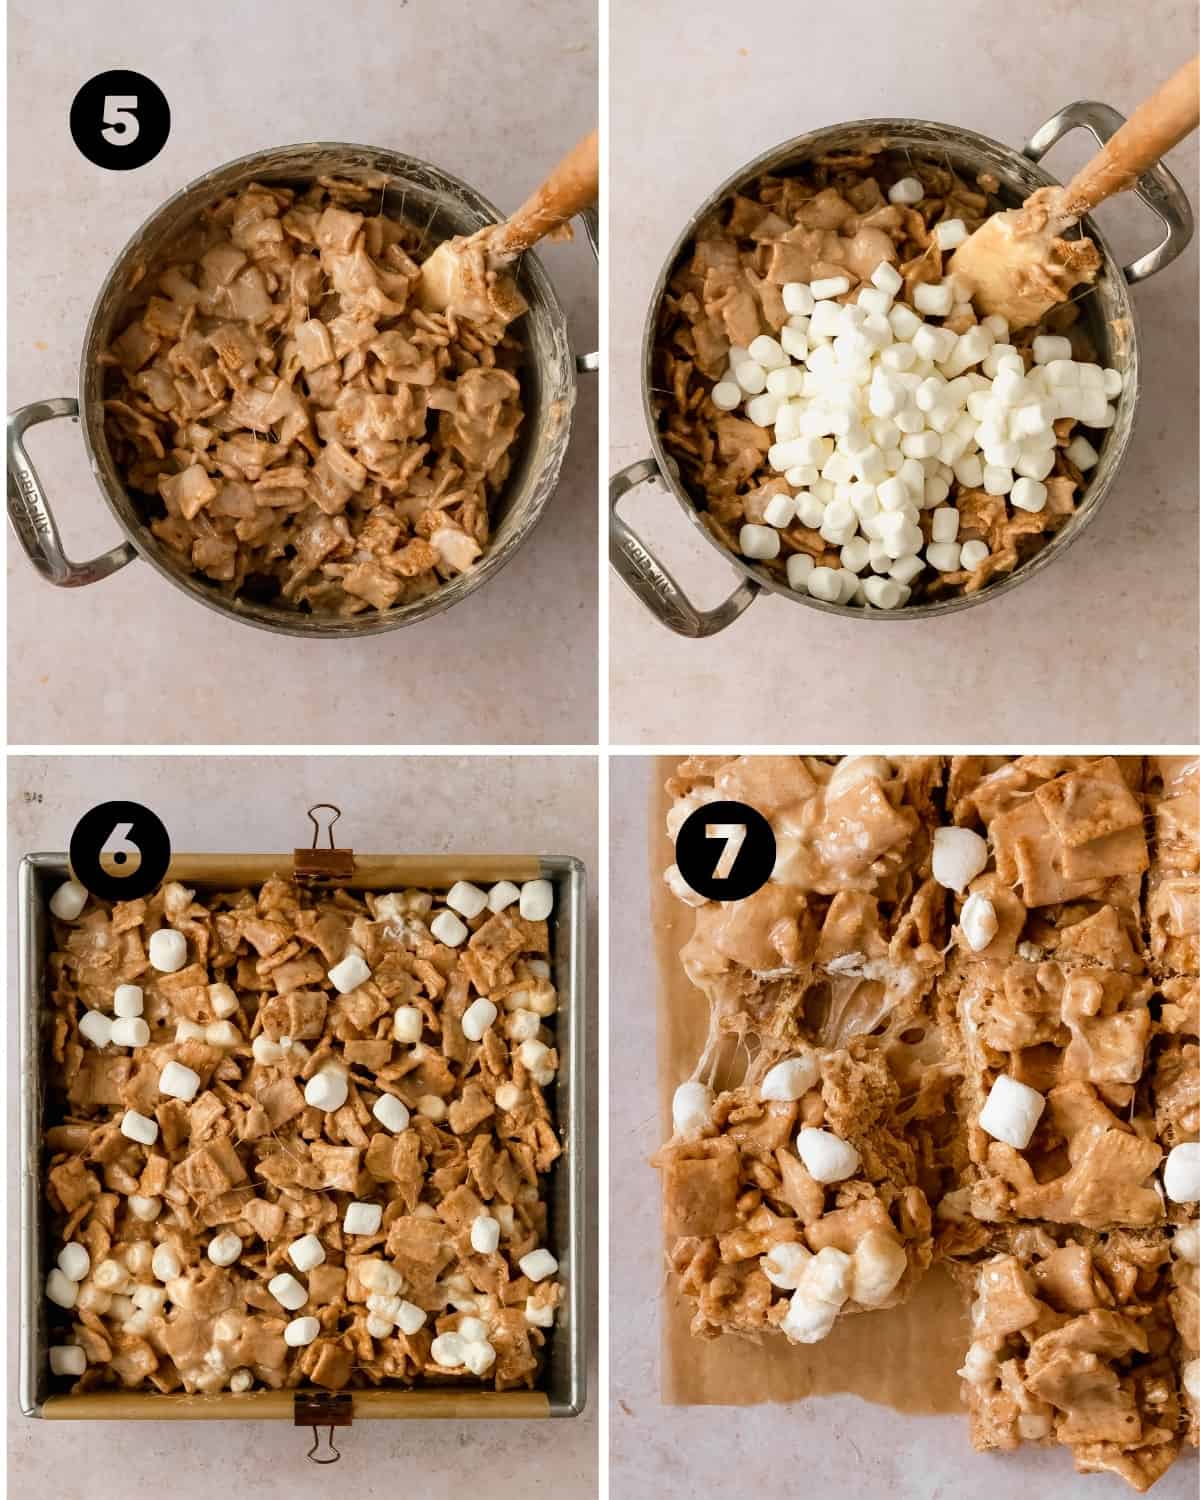 How to make Cinnamon Toast Crunch Bars. Melt the butter and marshmallows. Stir in the vanilla extract and cinnamon cereal.